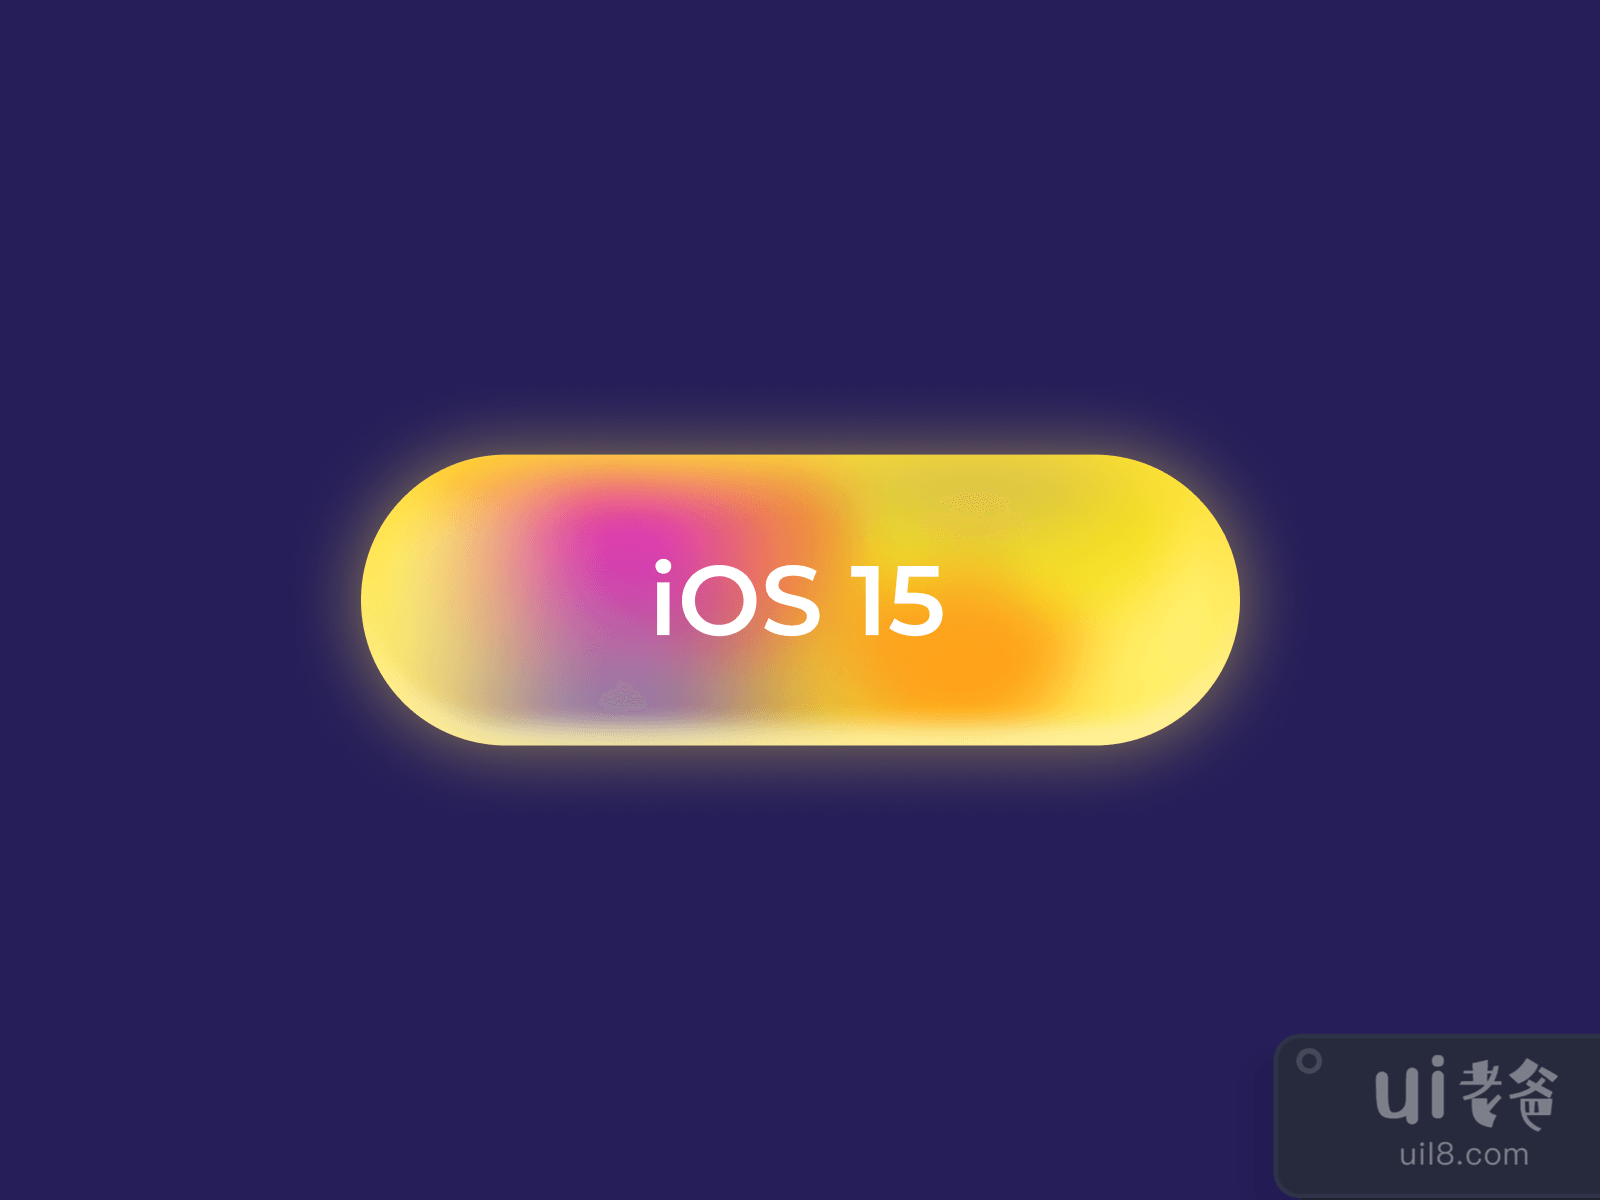 iOS 15 Button for Figma and Adobe XD No 4